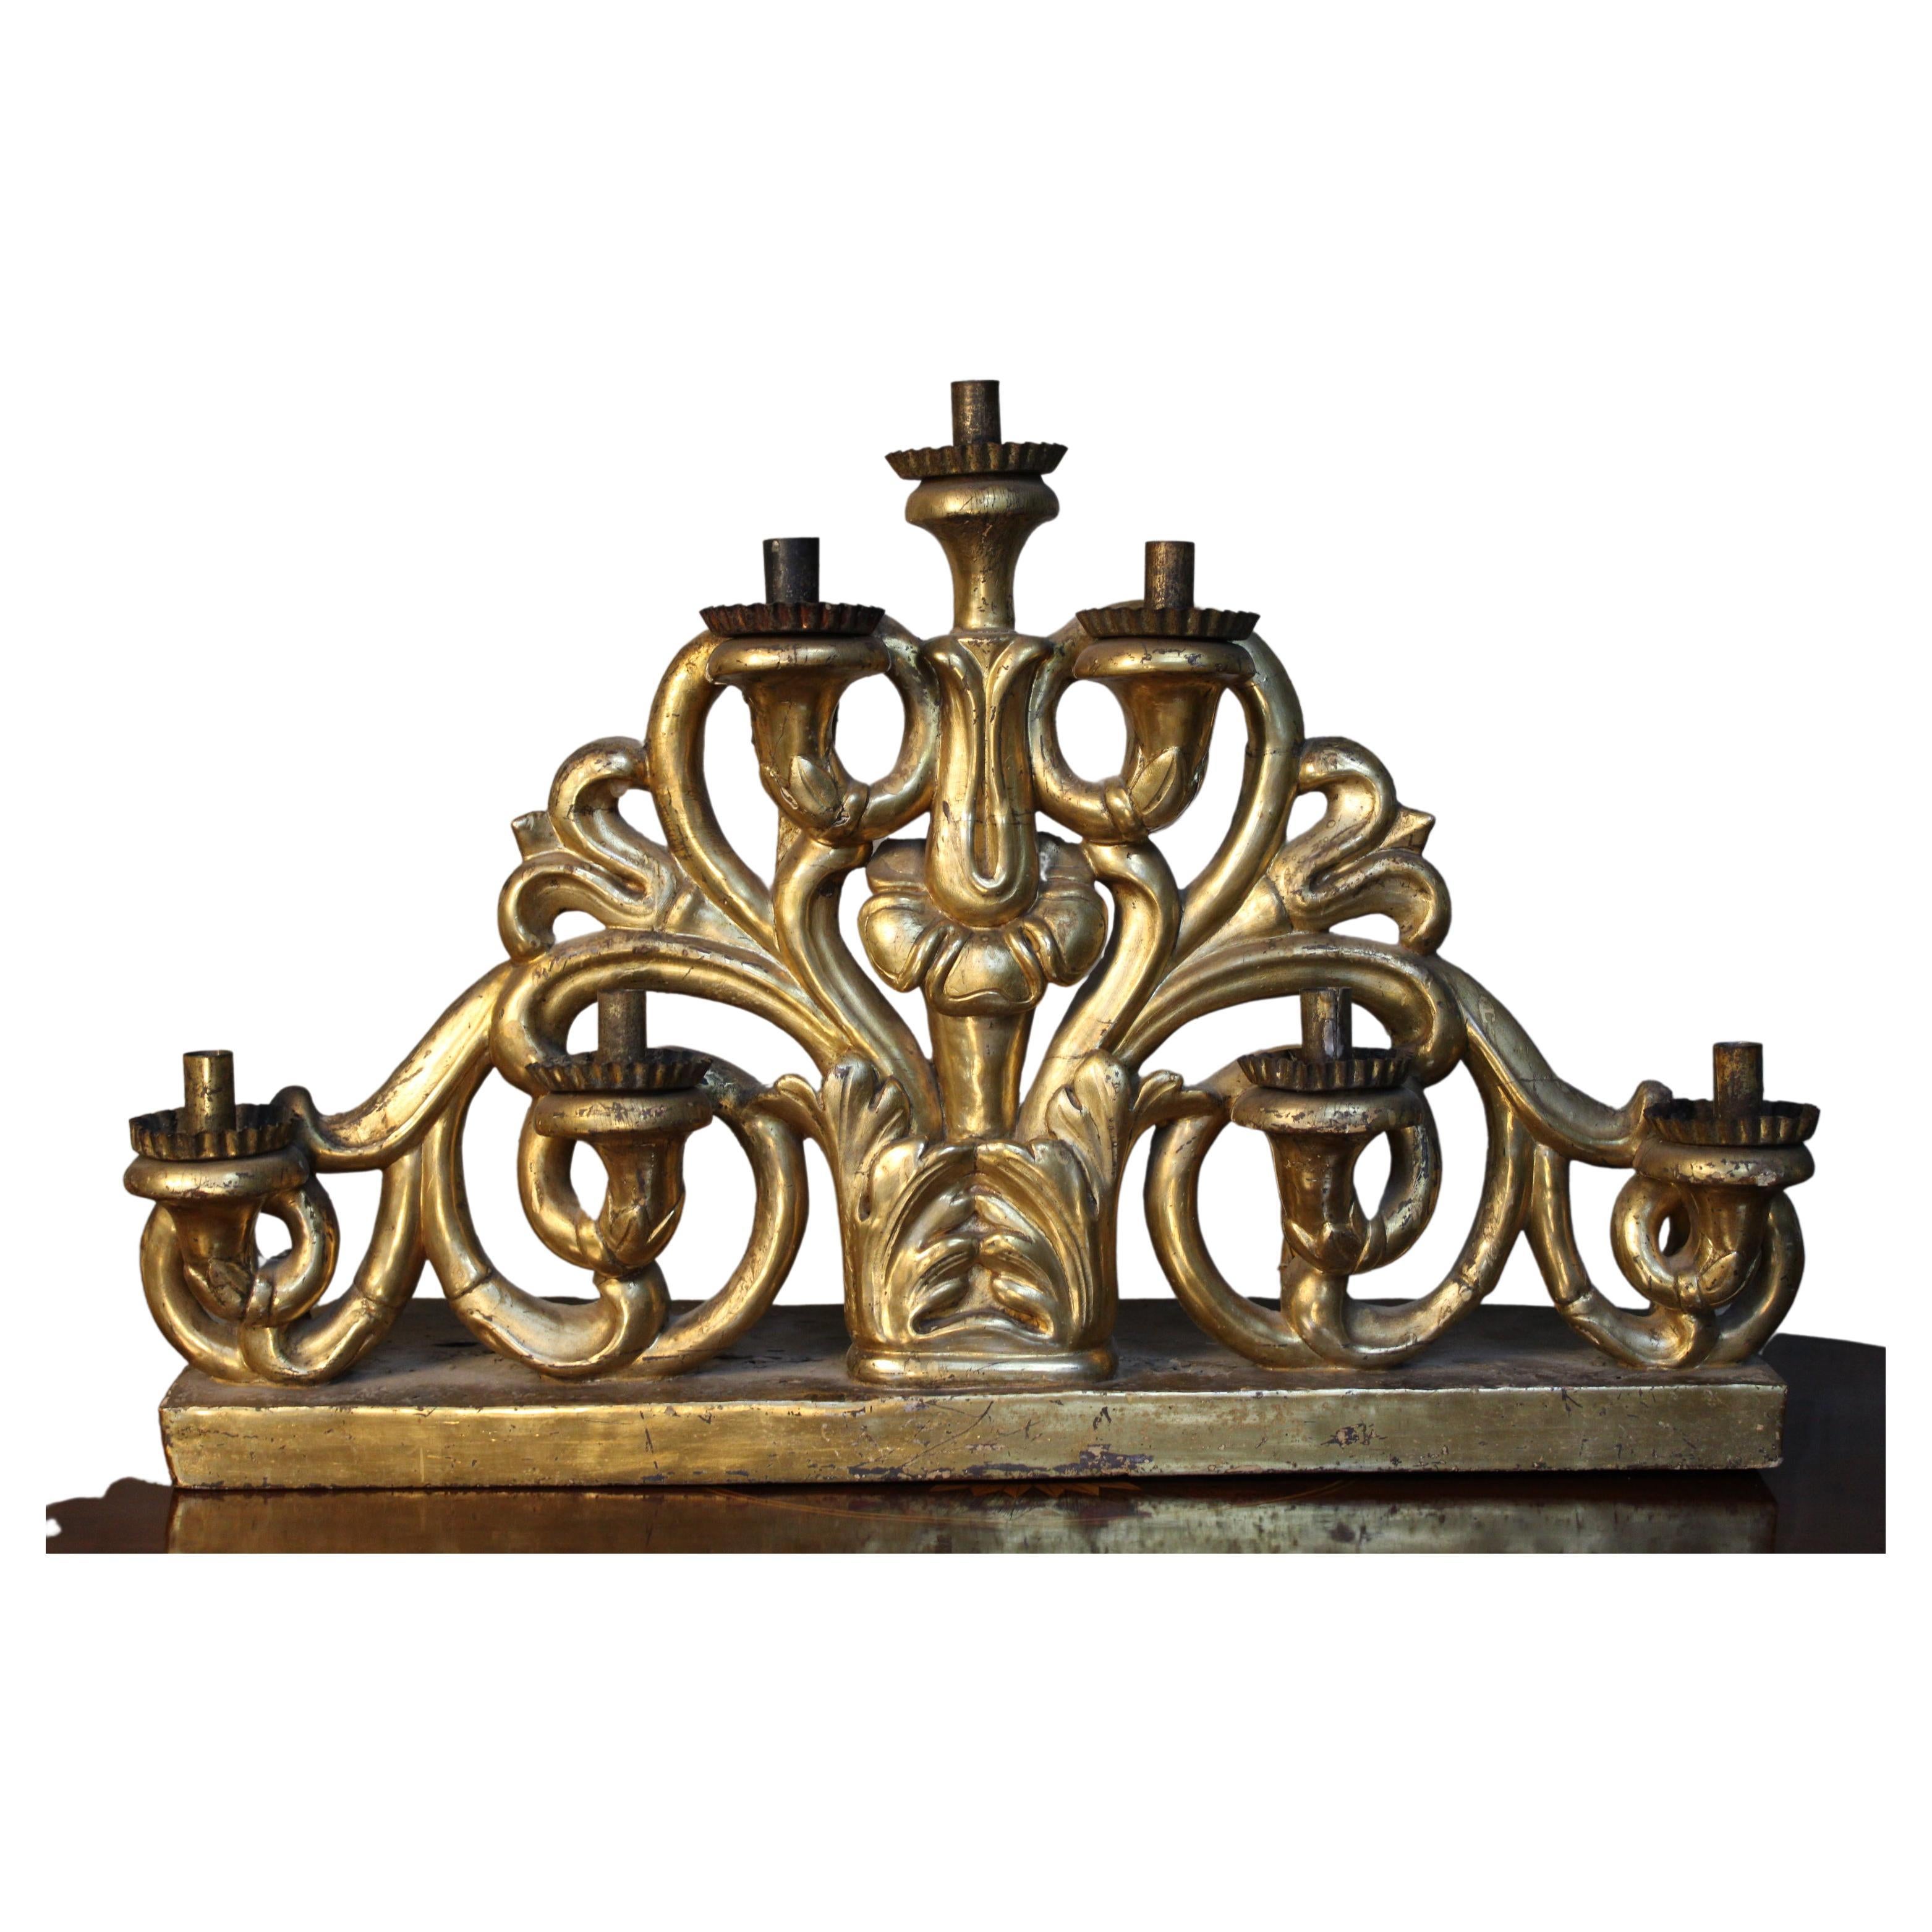 Early 17th century magnificent carved gild-wood candelabra baroque 1660s Italy 
Original gilded wood and very beautiful piece of art .generally in good condition with signs of agings as shown on the photos. may needs some restorations.
